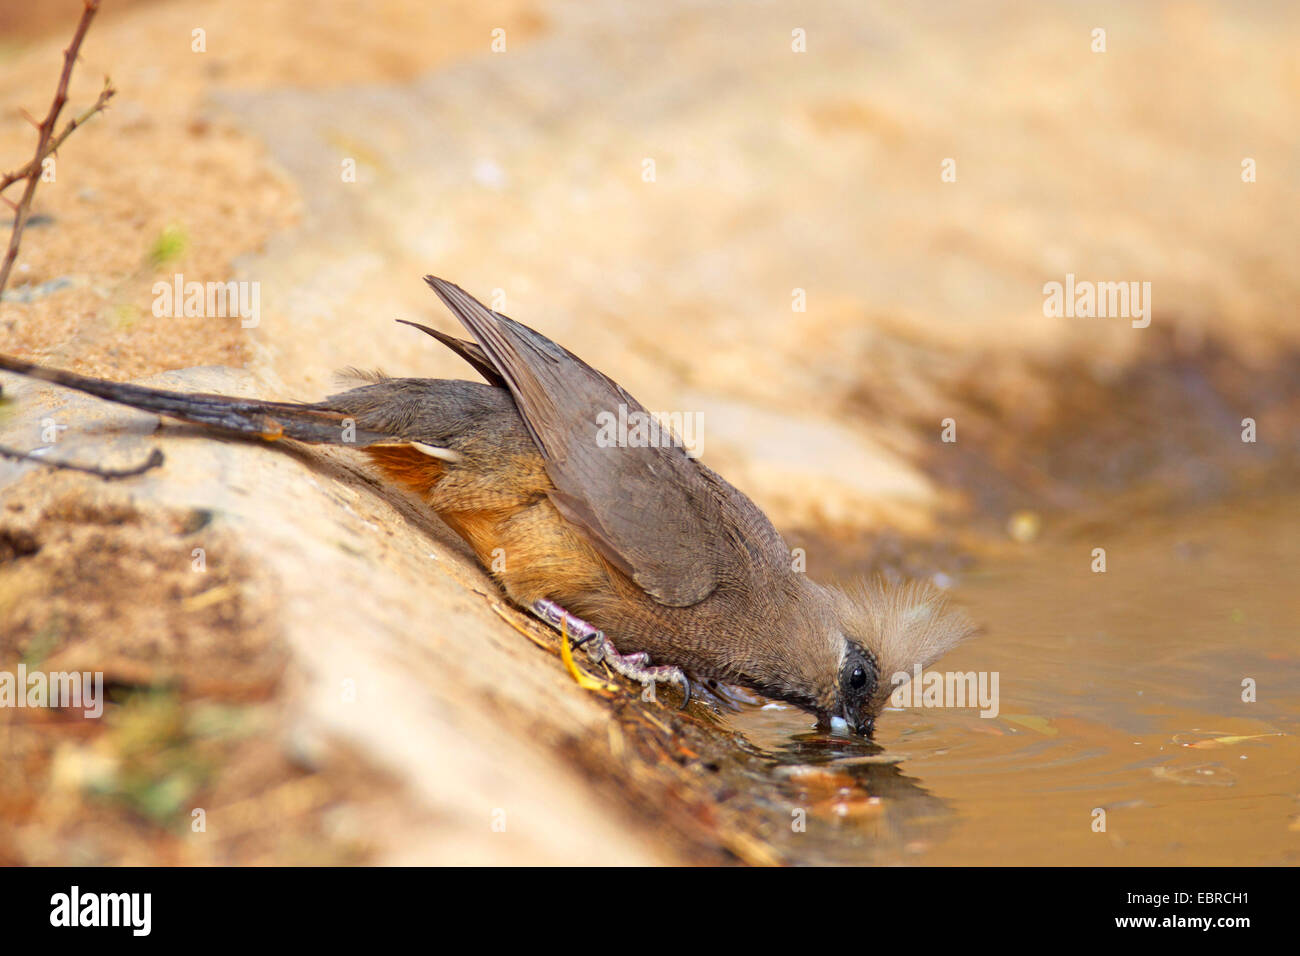 Speckled mousebird (Colius striatus), drinking at a waterhole, South Africa, North West Province, Barberspan Bird Sanctuary Stock Photo